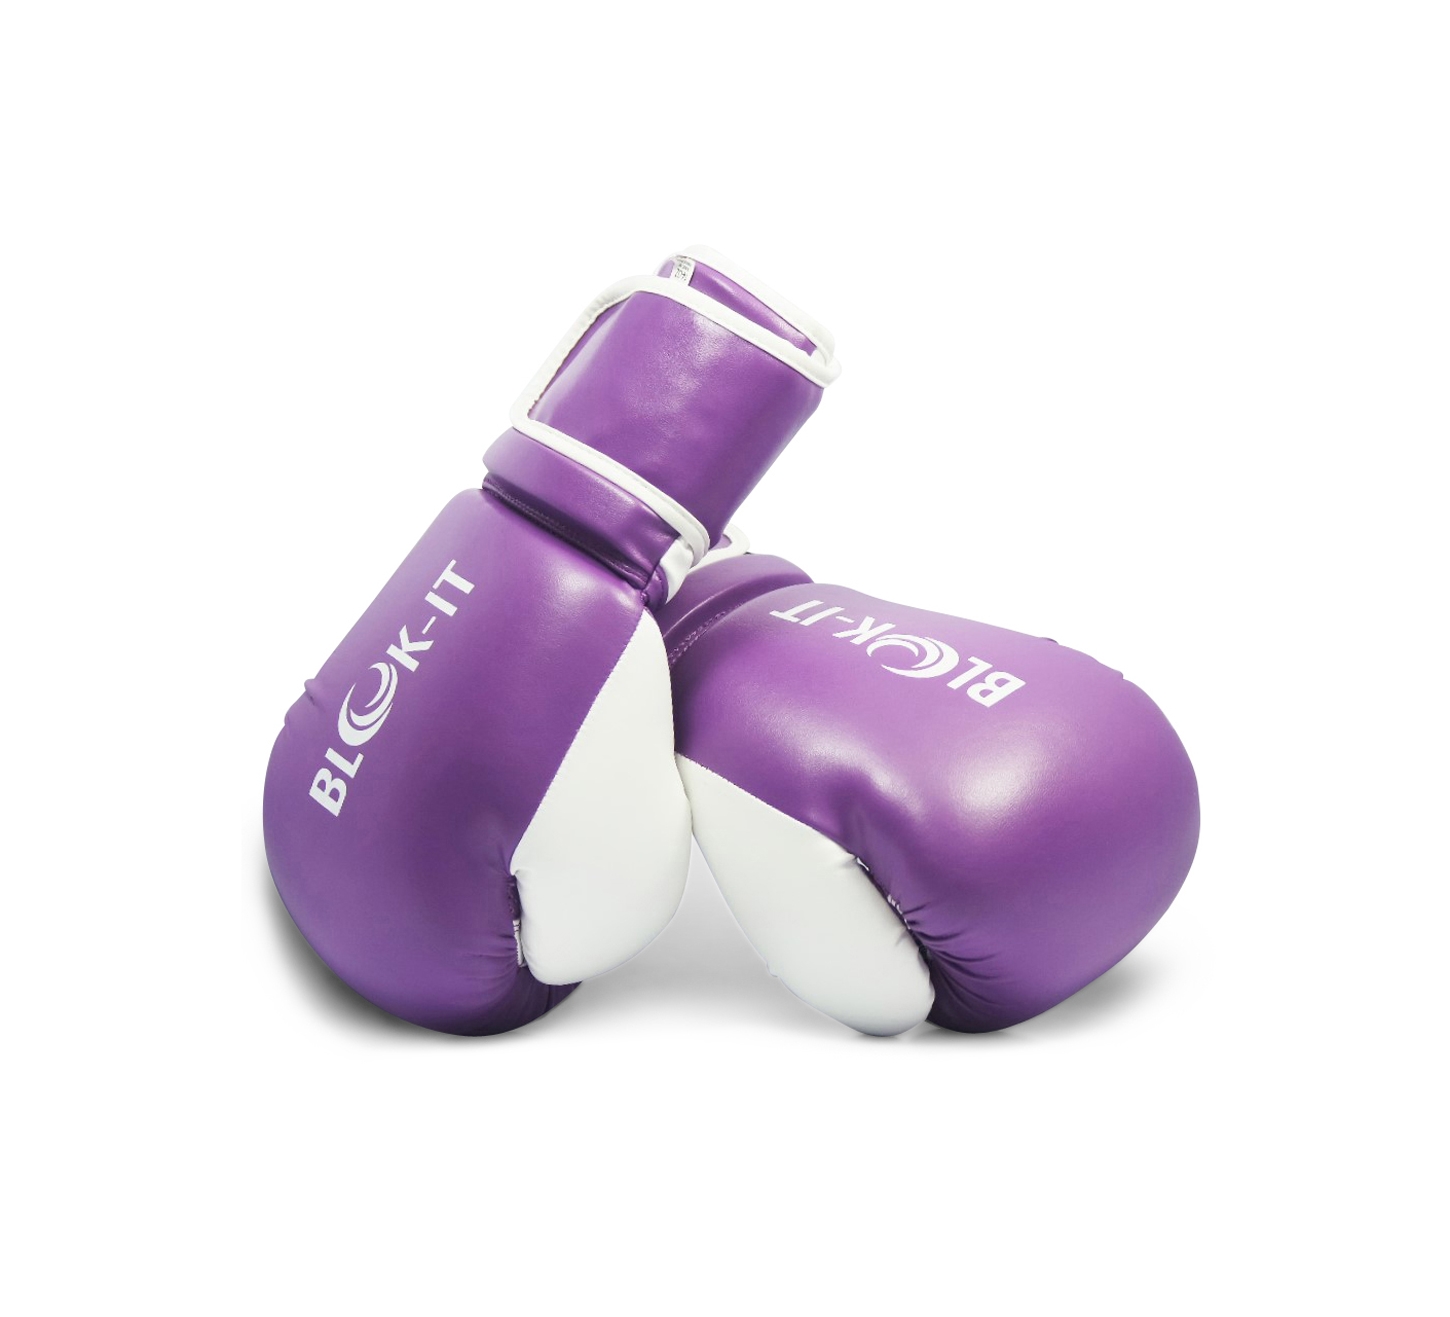 Pro Boxing Gloves with The Easy On/Easy Off Quick Release Strap Blok-IT Boxing Gloves 